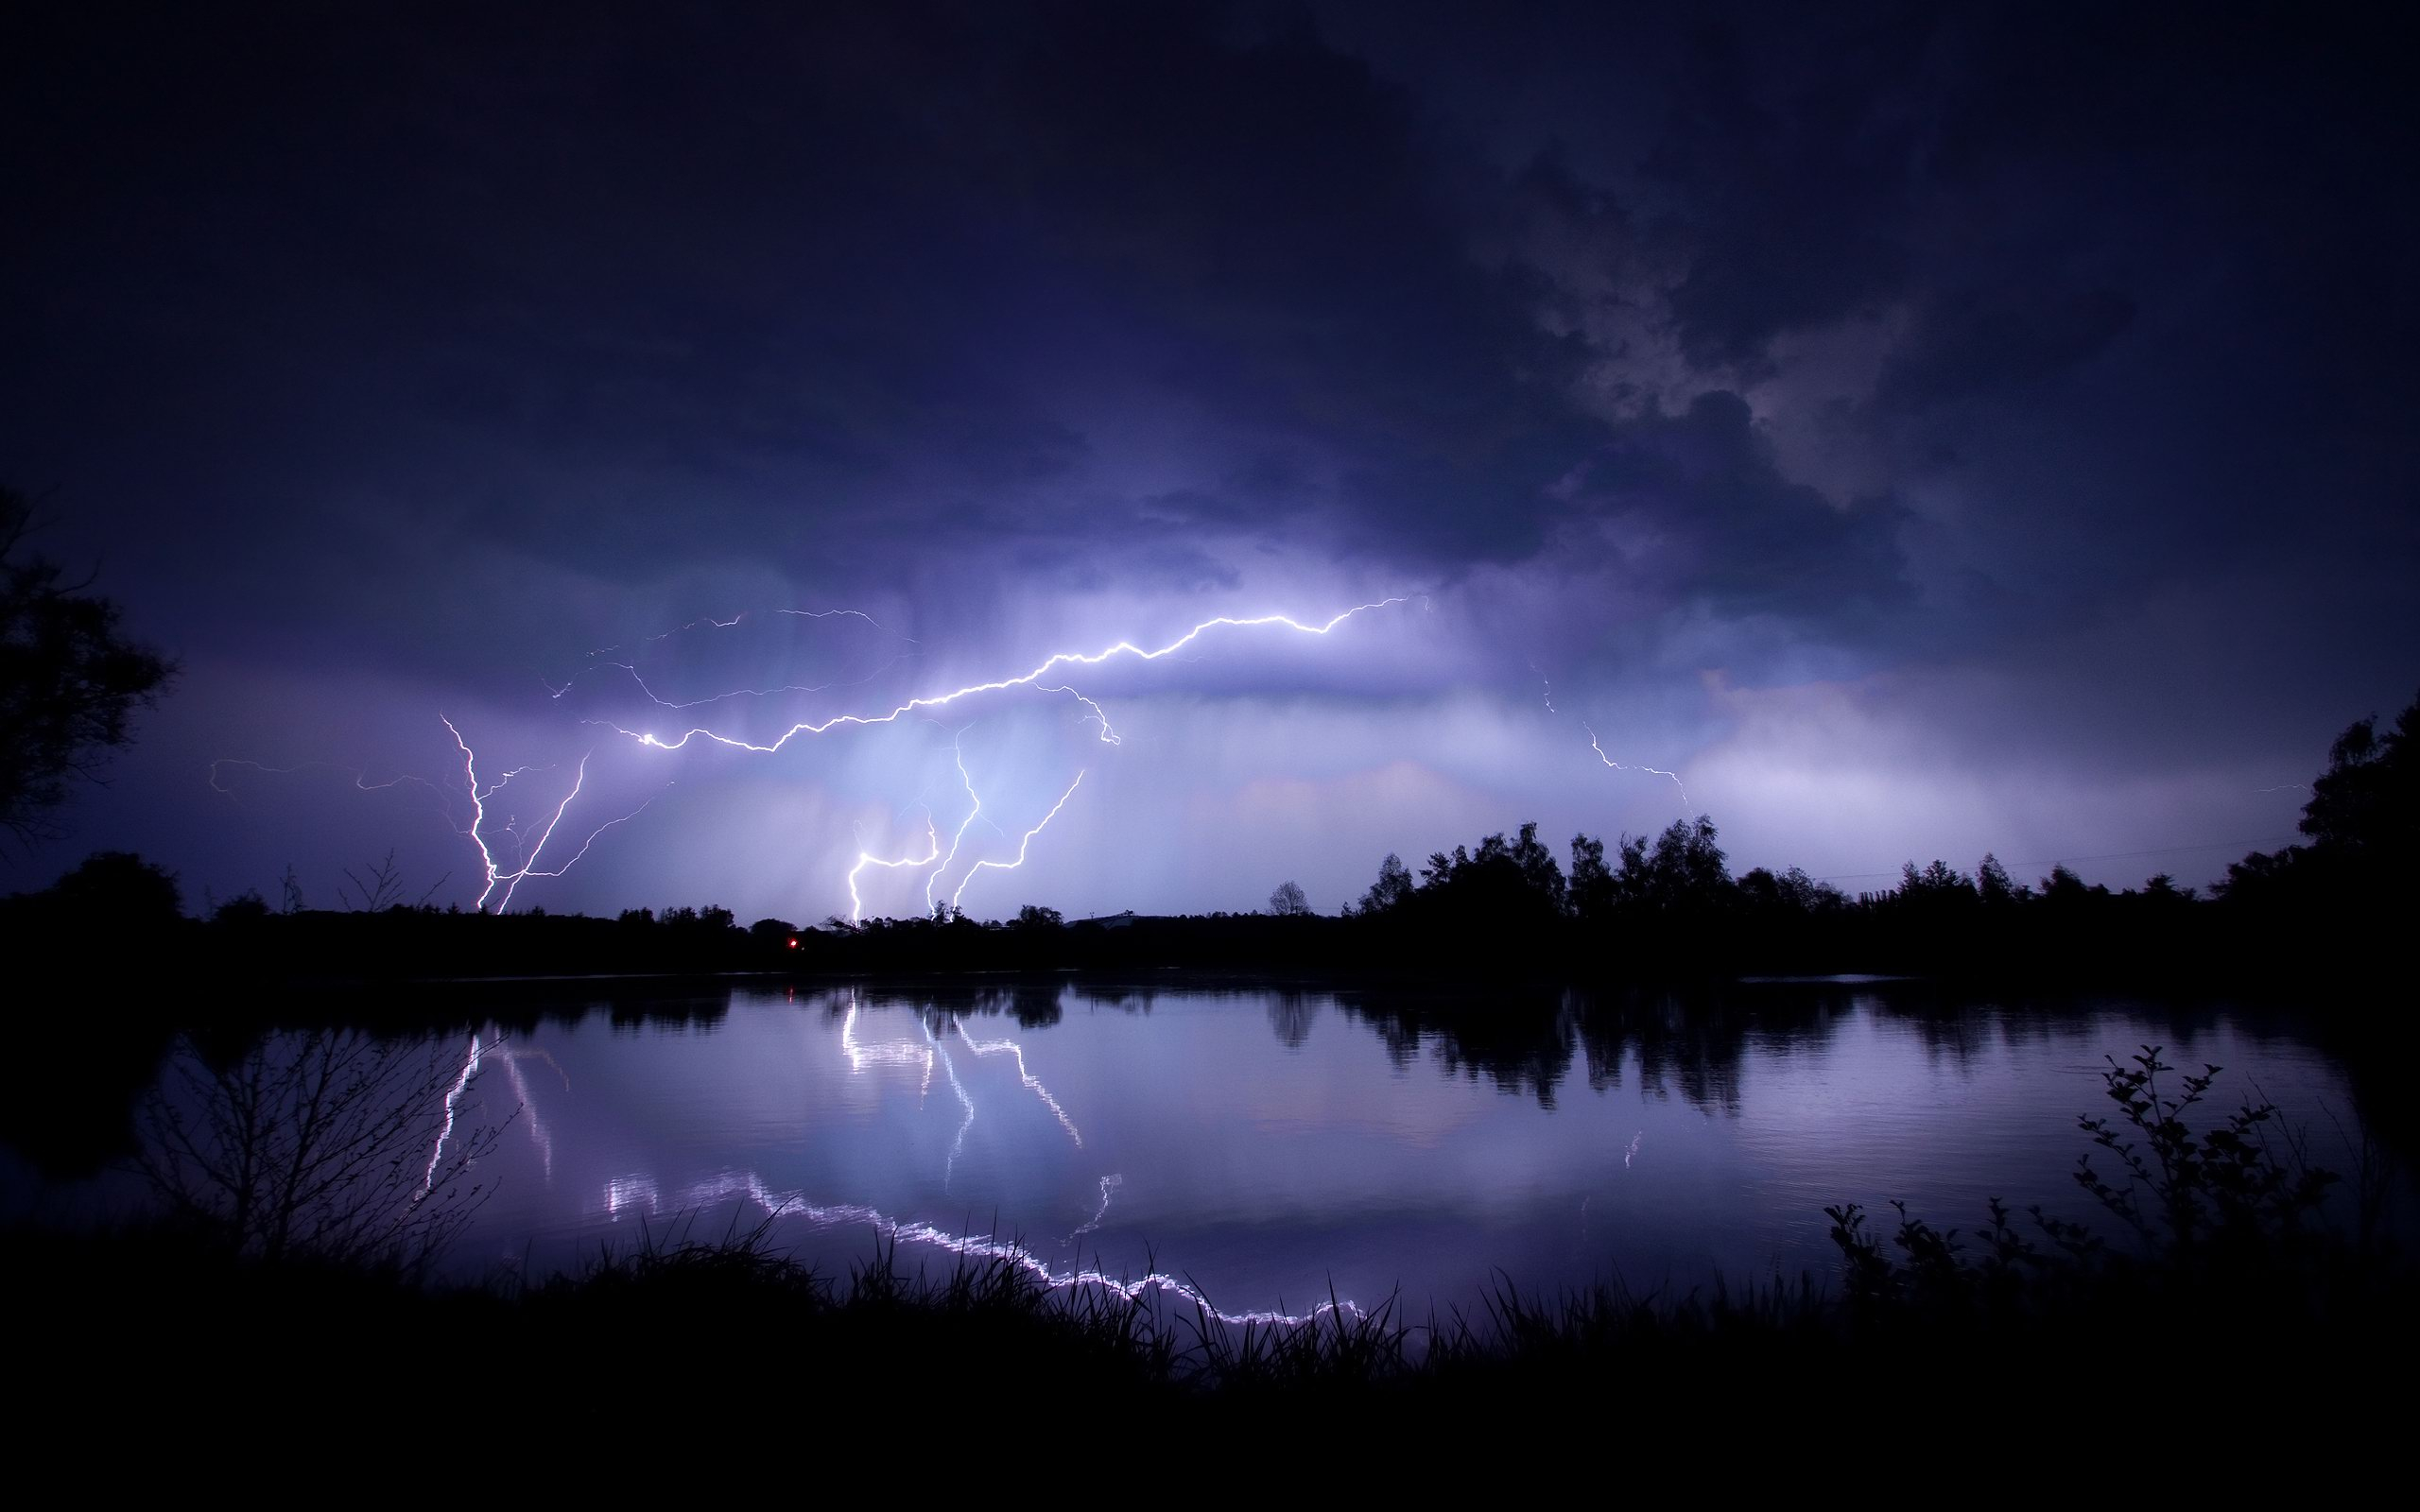 2560x1600 Landscapes nature trees forest lakes reflection lightning rain storm night water contrast bright light scenic wallpaper | | 24699 |